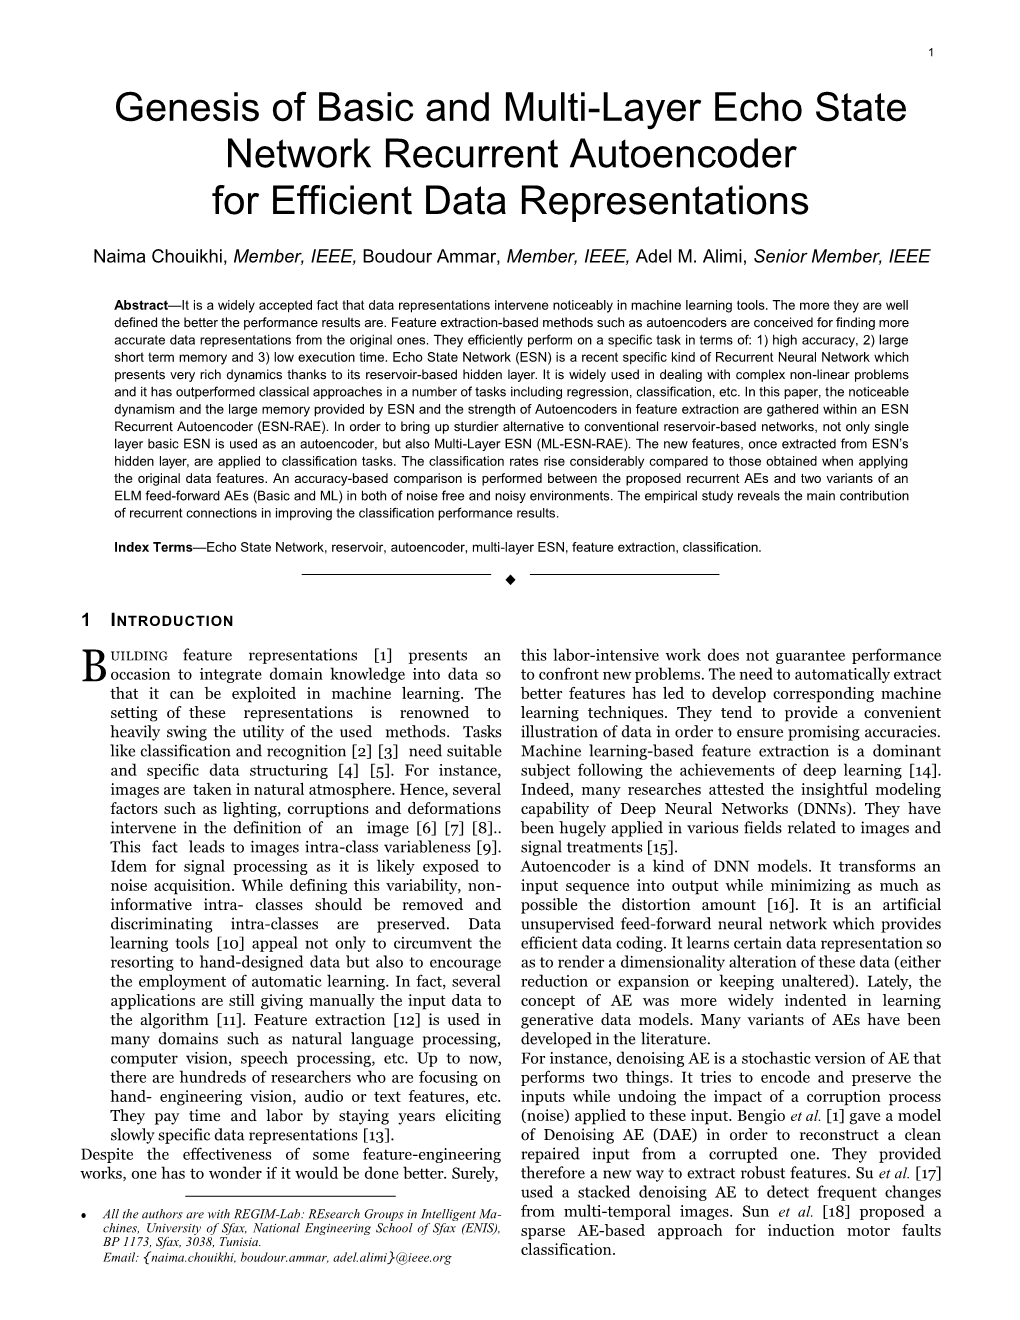 Genesis of Basic and Multi-Layer Echo State Network Recurrent Autoencoder for Efficient Data Representations